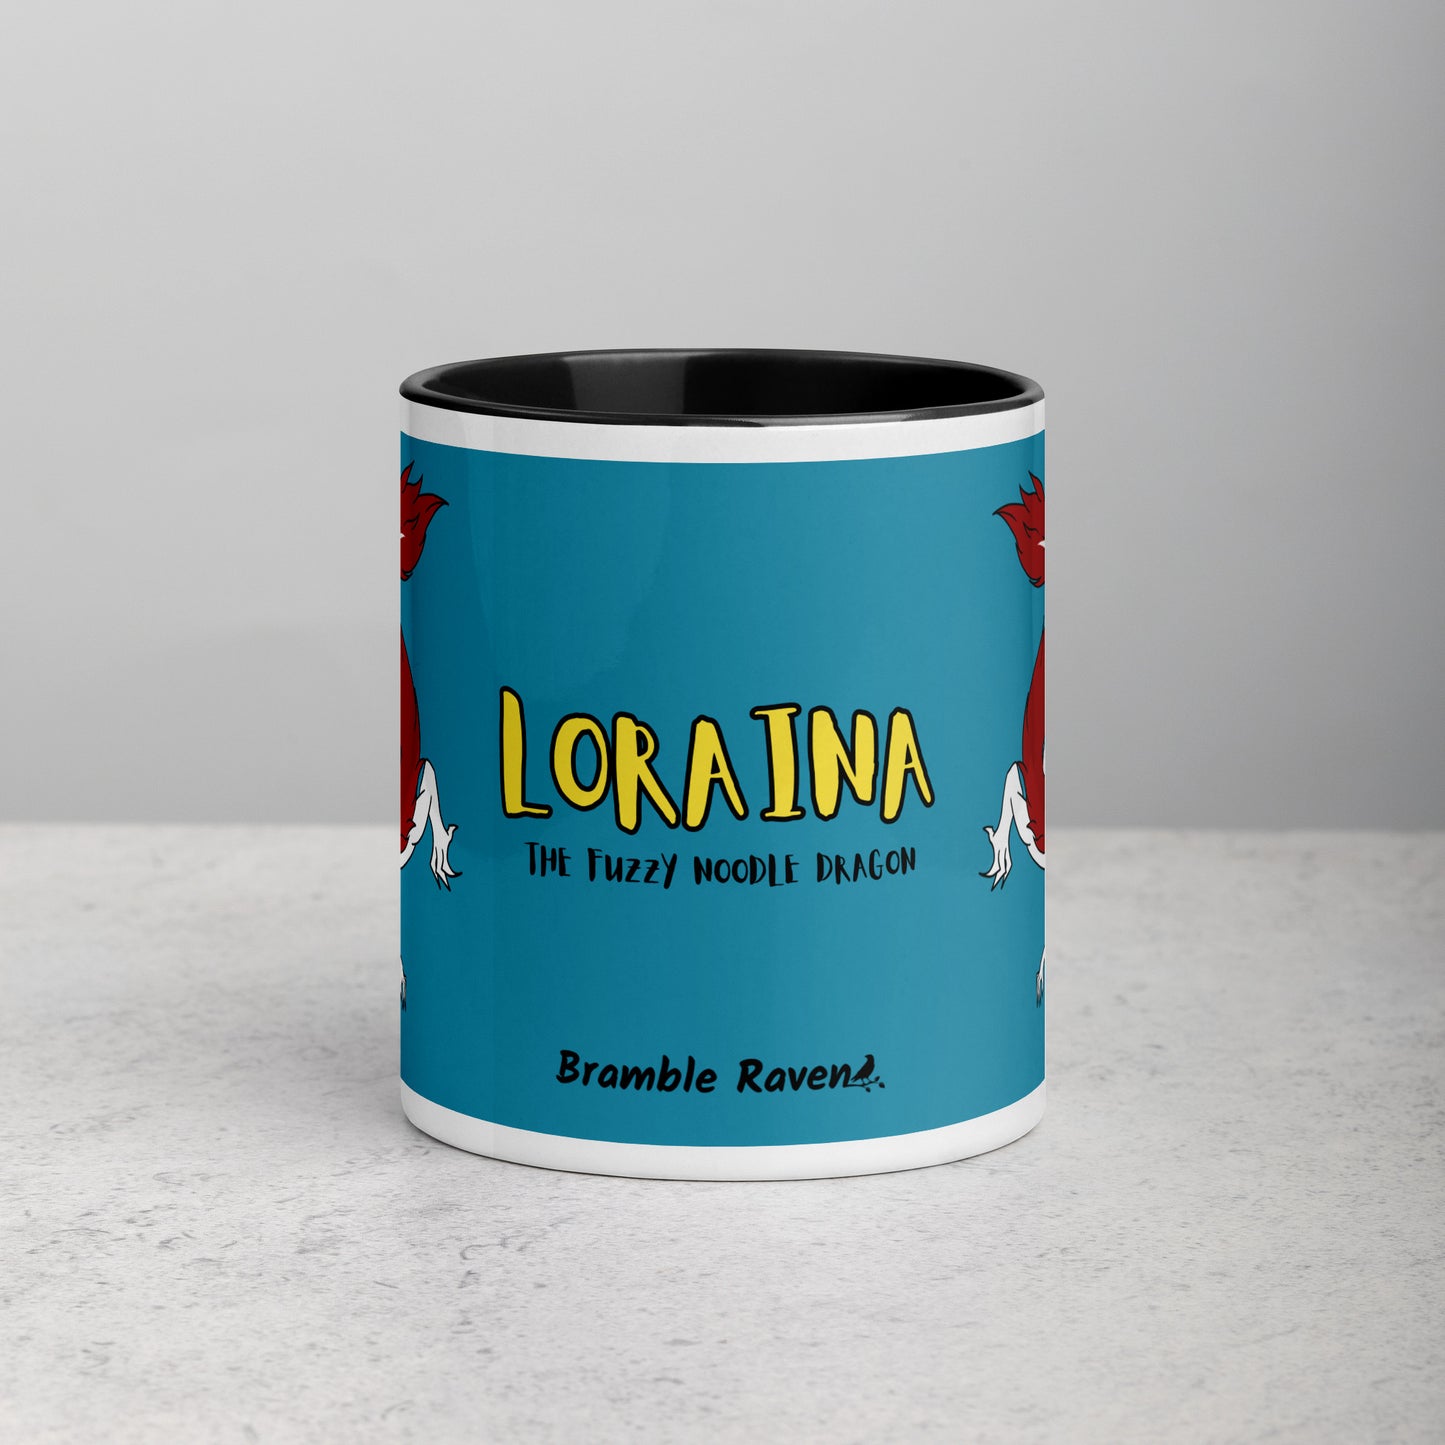 11 ounce ceramic mug with black handle, rim and inside color. Features double-sided image of Loraina the Fuzzy Noodle Dragon on a dark blue background. Mug is microwave and dishwasher safe. Front view shows Loraina The Fuzzy Noodle Dragon text and Bramble Raven logo.